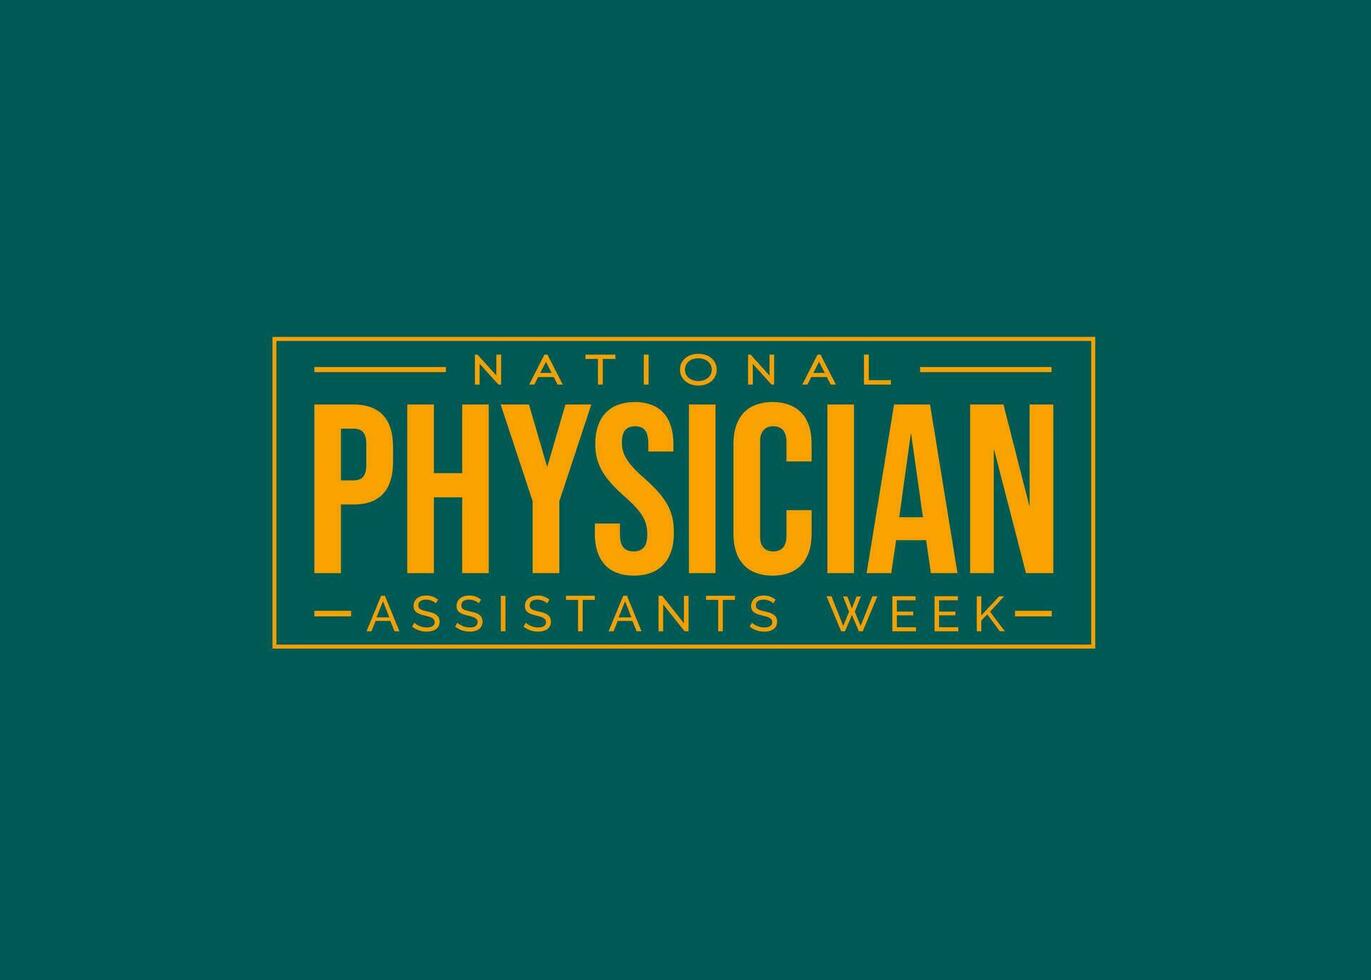 national physician assistant week vector